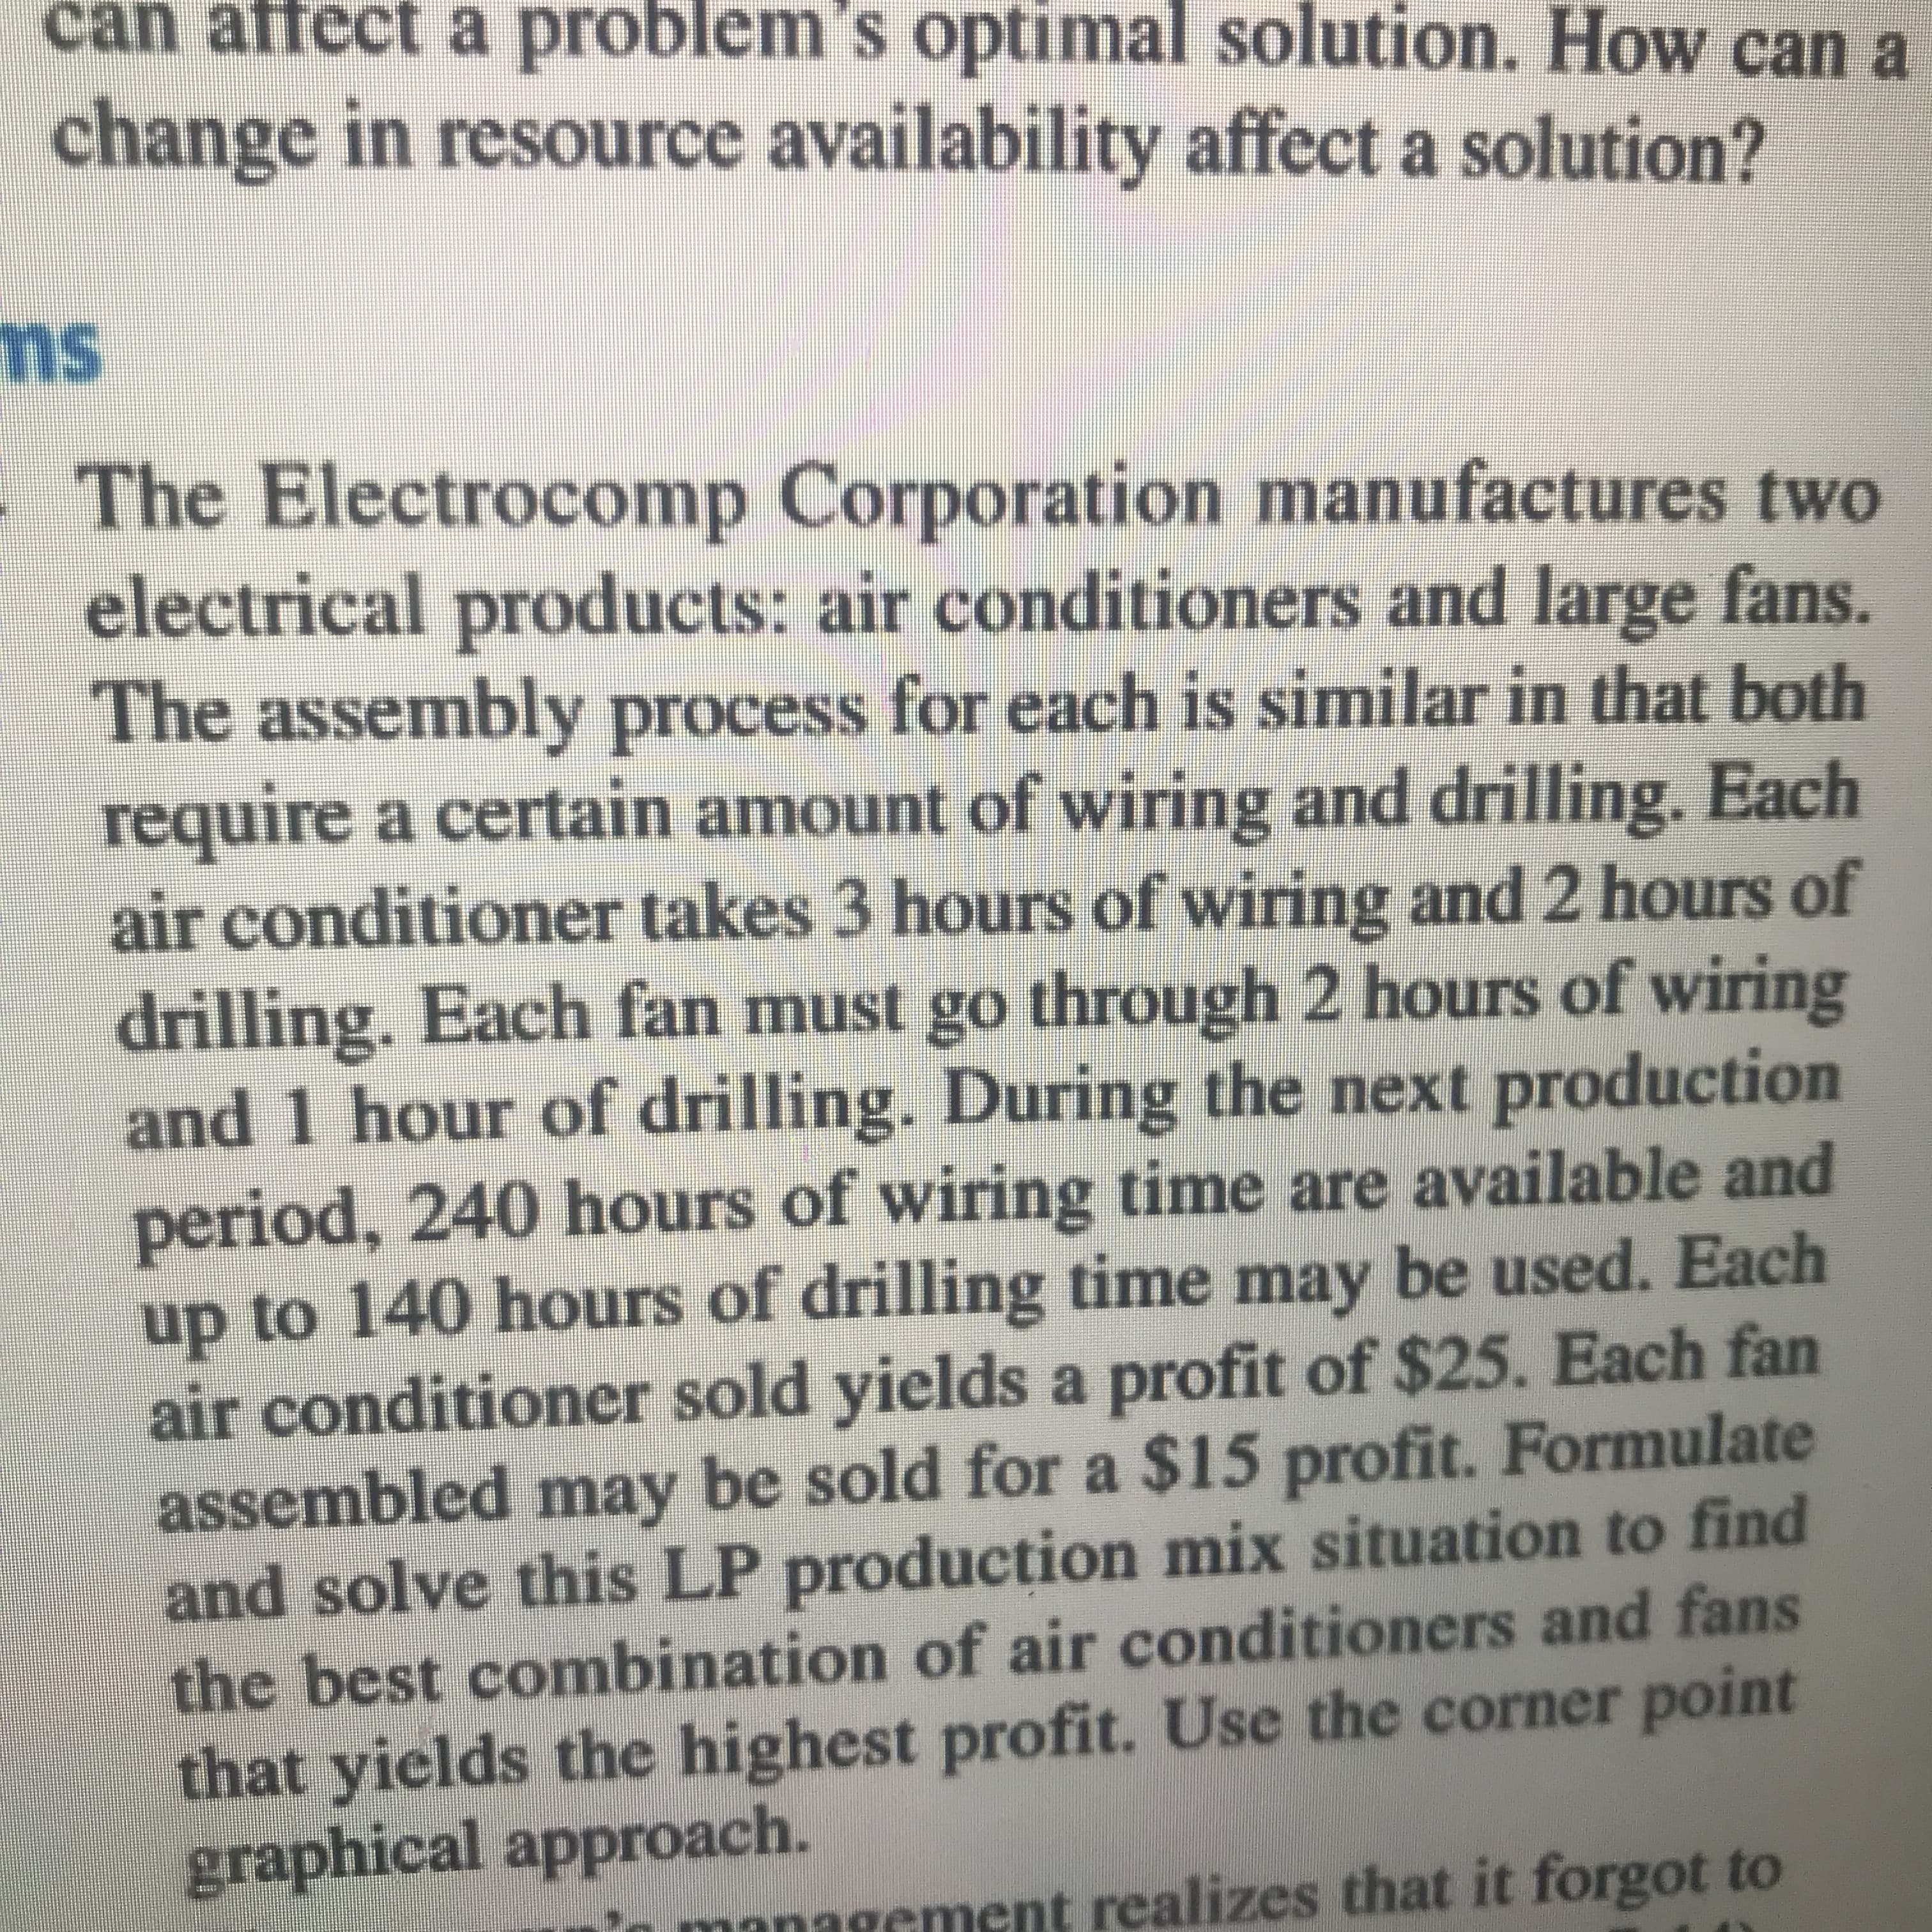 can affect a problem 's optimal solution. How can a
change in resource availability affect a solution?
ms
The Electrocomp Corporation manufactures two
electrical products: air conditioners and large fans.
The assembly process for each is similar in that both
require a certain amount of wiring and drilling.
air conditioner takes 3 hours of wiring and 2 hours of
drilling. Each fan must go through 2 hours of wiring
and 1 hour of drilling. During the next production
period, 240 hours of wiring time are available and
up to 140 hours of drilling time may be used. Each
air conditioner sold yields a profit of $25. Each fan
assembled may be sold for a $15 profit. Formulate
and solve this LP production mix situation to find
the best combination of air conditioners and fans
that yields the highest profit. Use the corner point
graphical approach.
Each
managcment realizes that it forgot to
